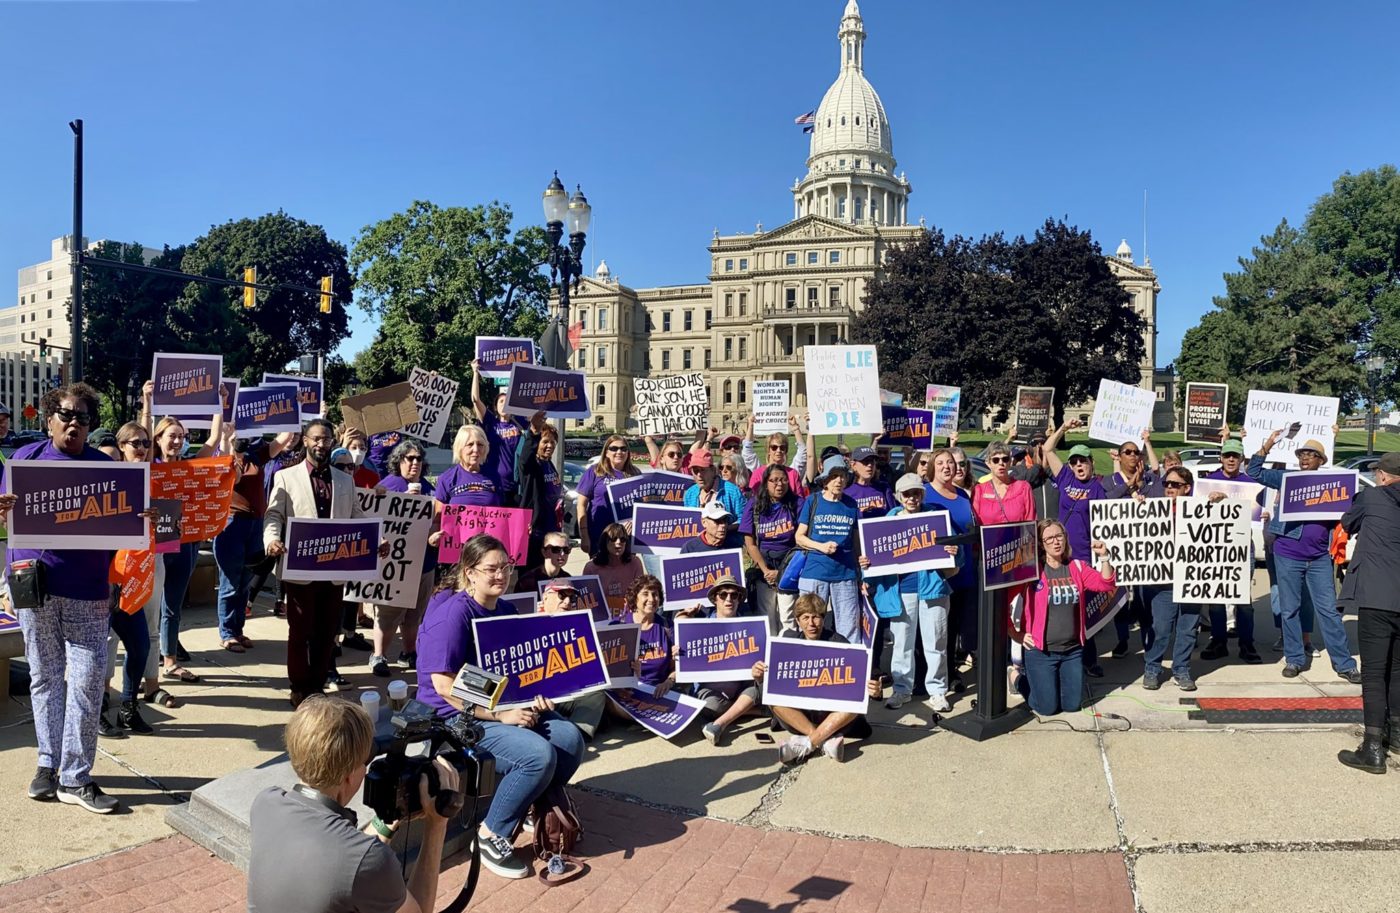 Reproductive Freedom For All advocates and supporters rally outside the Michigan State Capitol